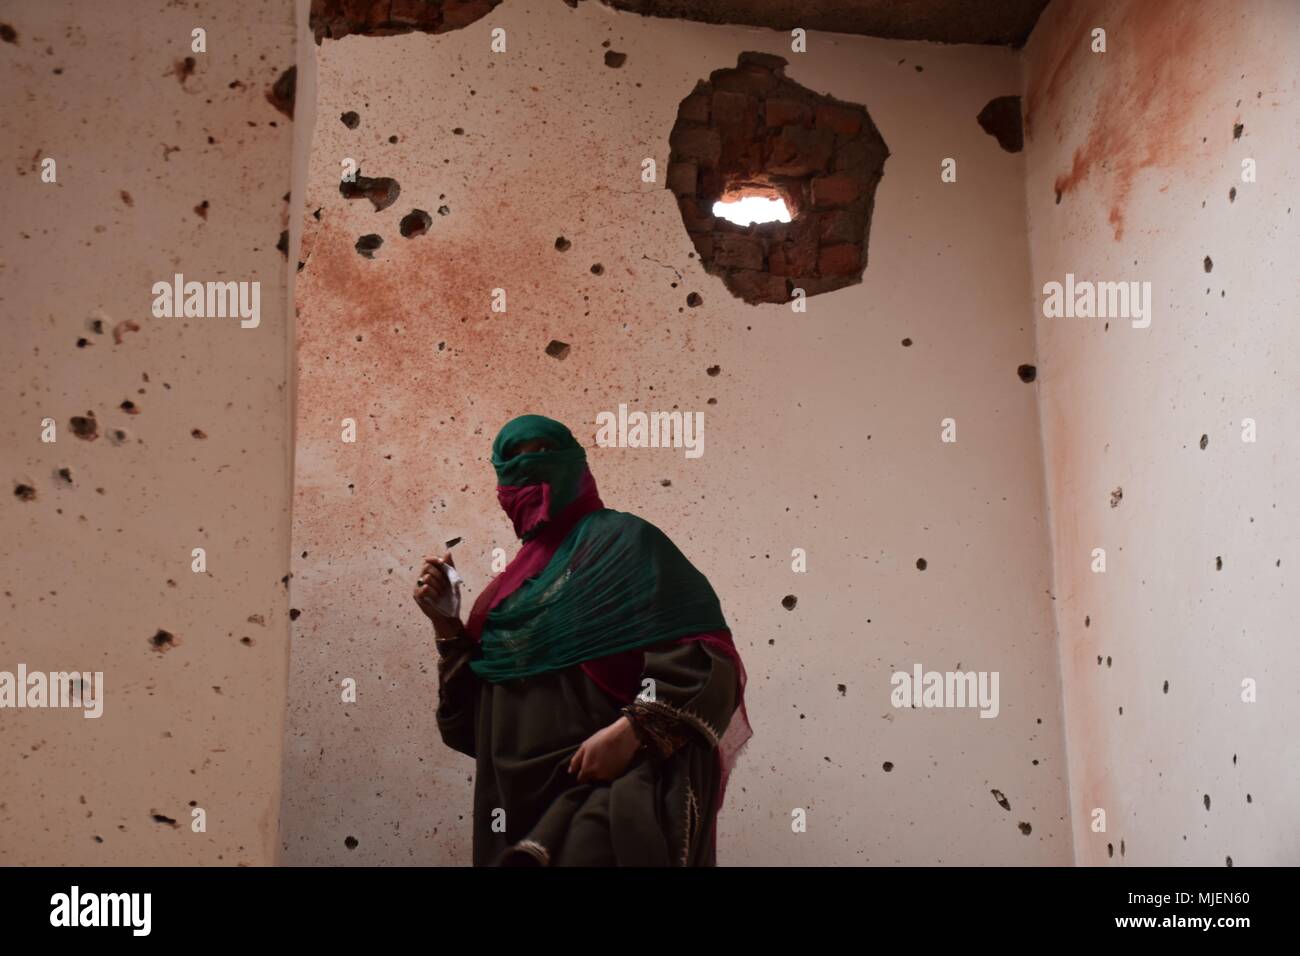 May 5, 2018 - Srinagar, Jammu & Kashmir, India - Women walks inside the partly damaged building in an encounter in Srinagar.4 Killed and several injured in an encounter between Indian forces and militants at chatabal area of Srinagar summer capital of Indian Kashmir on Saturday. Three militants were killed during a brief shootout after government forces laid seige around densely populated chatabal area of Srinagar. A young man also died after he was hit by the armoured vehicle during the clashes between the residents and police force as residents tried to help the Militants in escape. (Credit Stock Photo